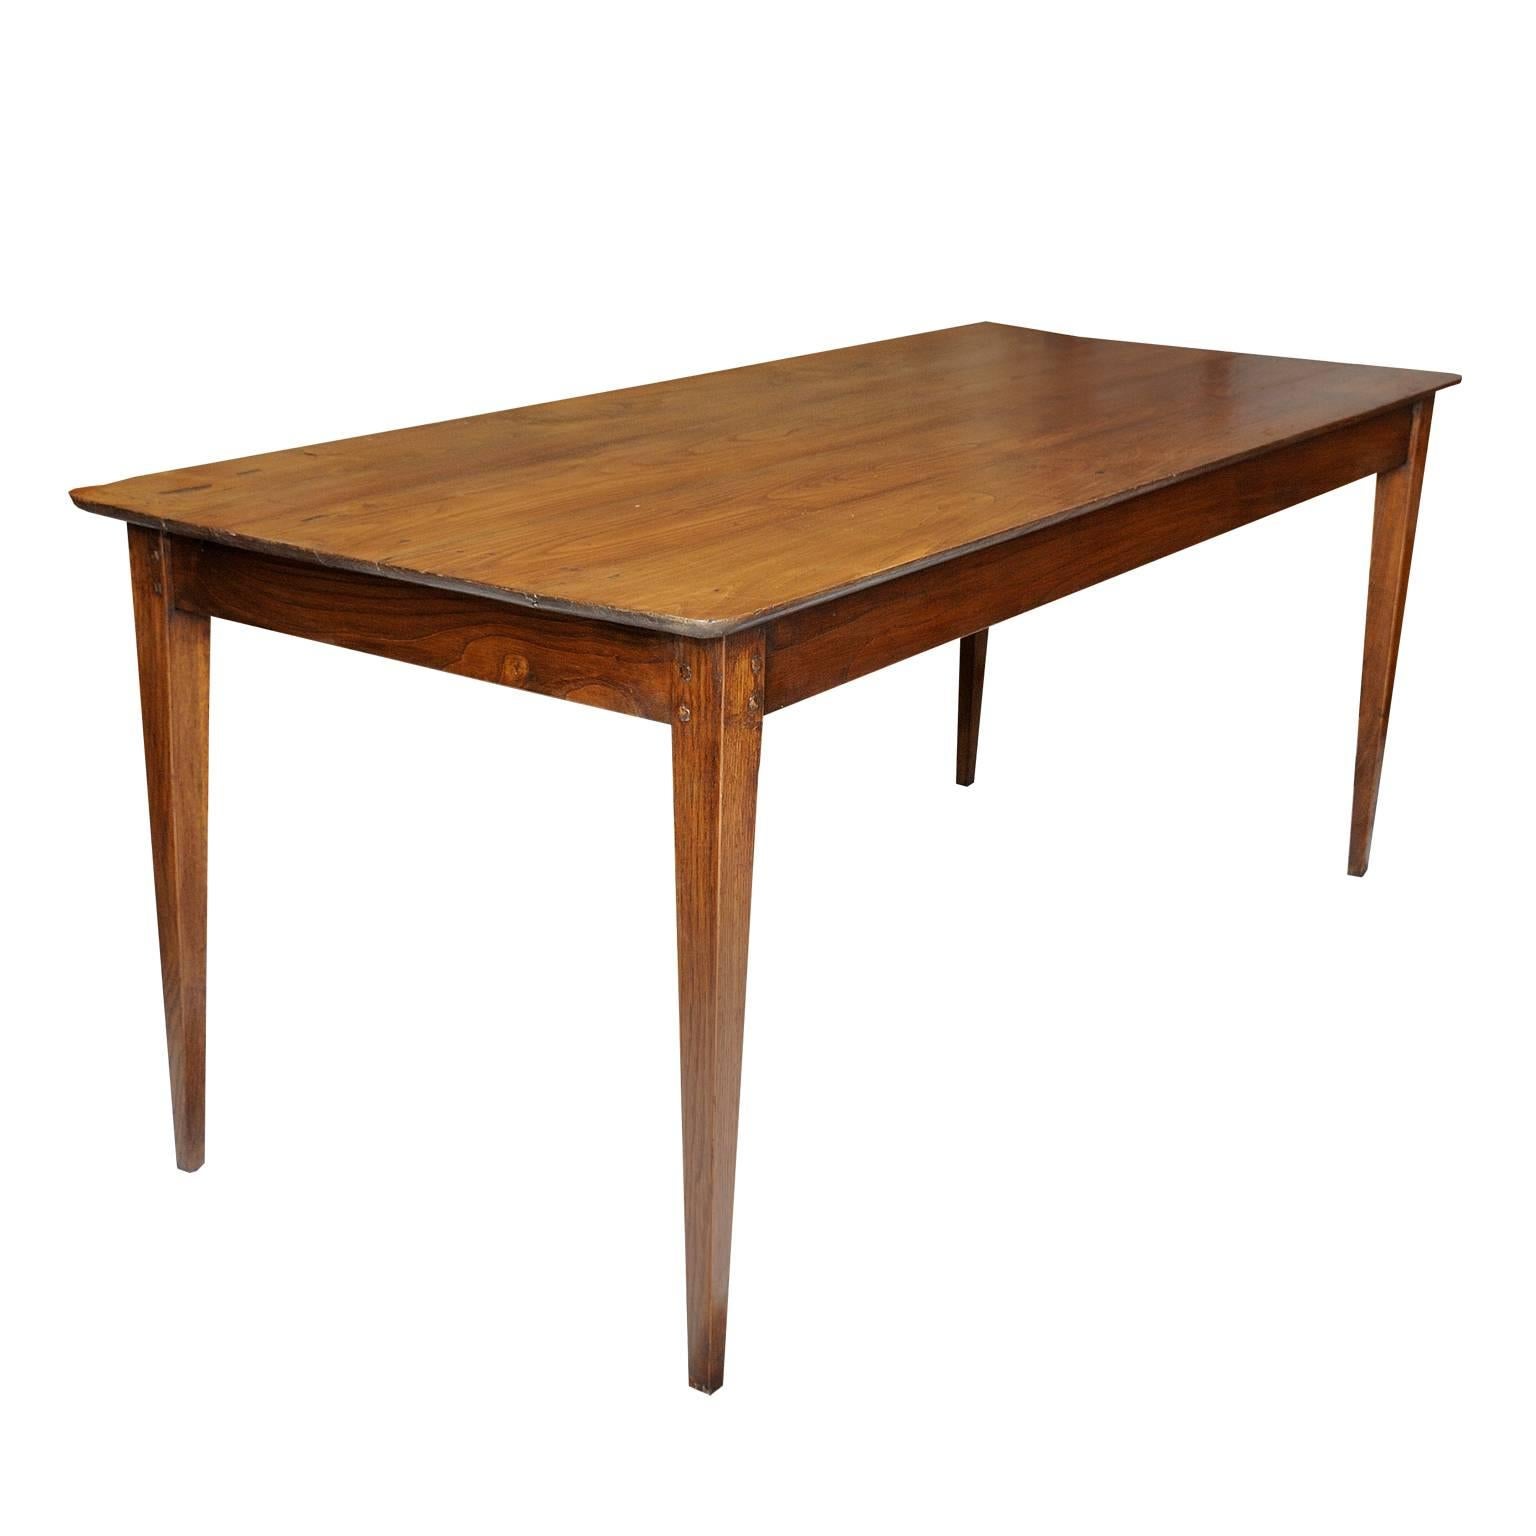 This is a rather lovely and well proportioned early 19th century elegant French Provincial chestnut farmhouse table standing on tall tapering legs with a very pretty planked top, to seat six-eight people, circa 1820.